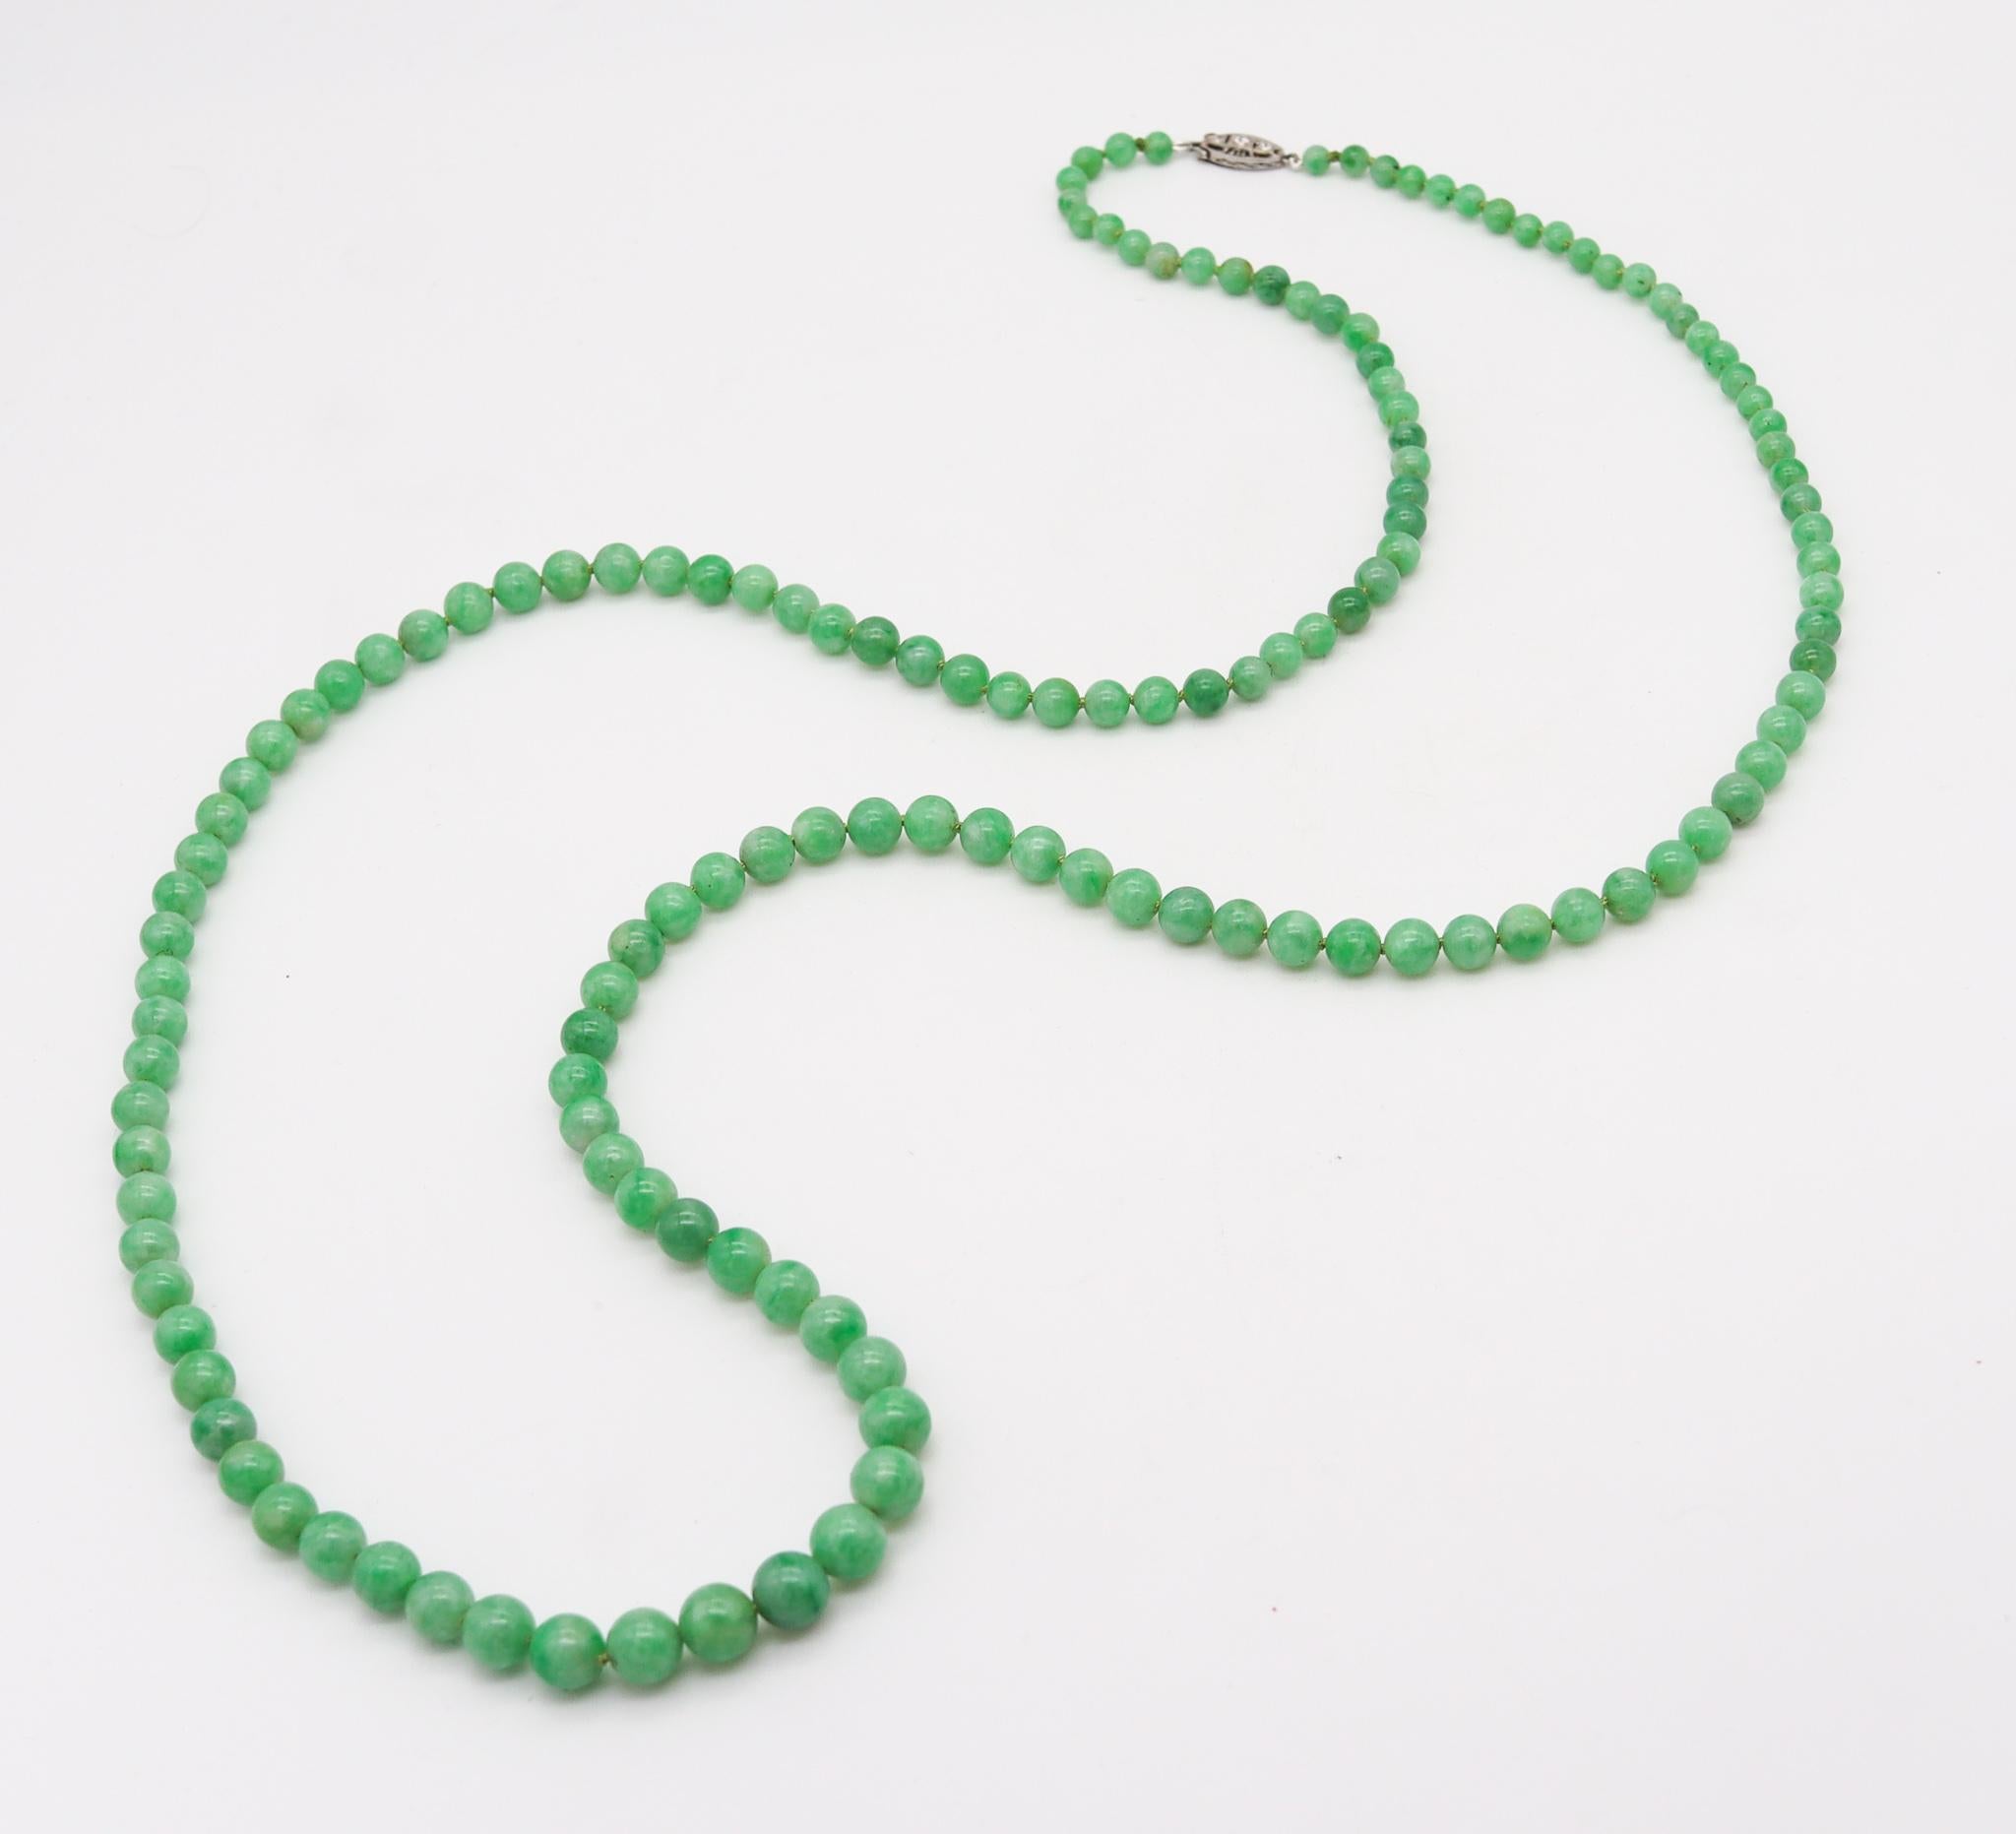 An art deco graduated jadeite beads necklace.

Fabulous long necklace sautoir type, created during the Art Deco period, circa 1925. It is composed by multiples graduated spheres beads of Burmese jadeite jade with the original platinum security box